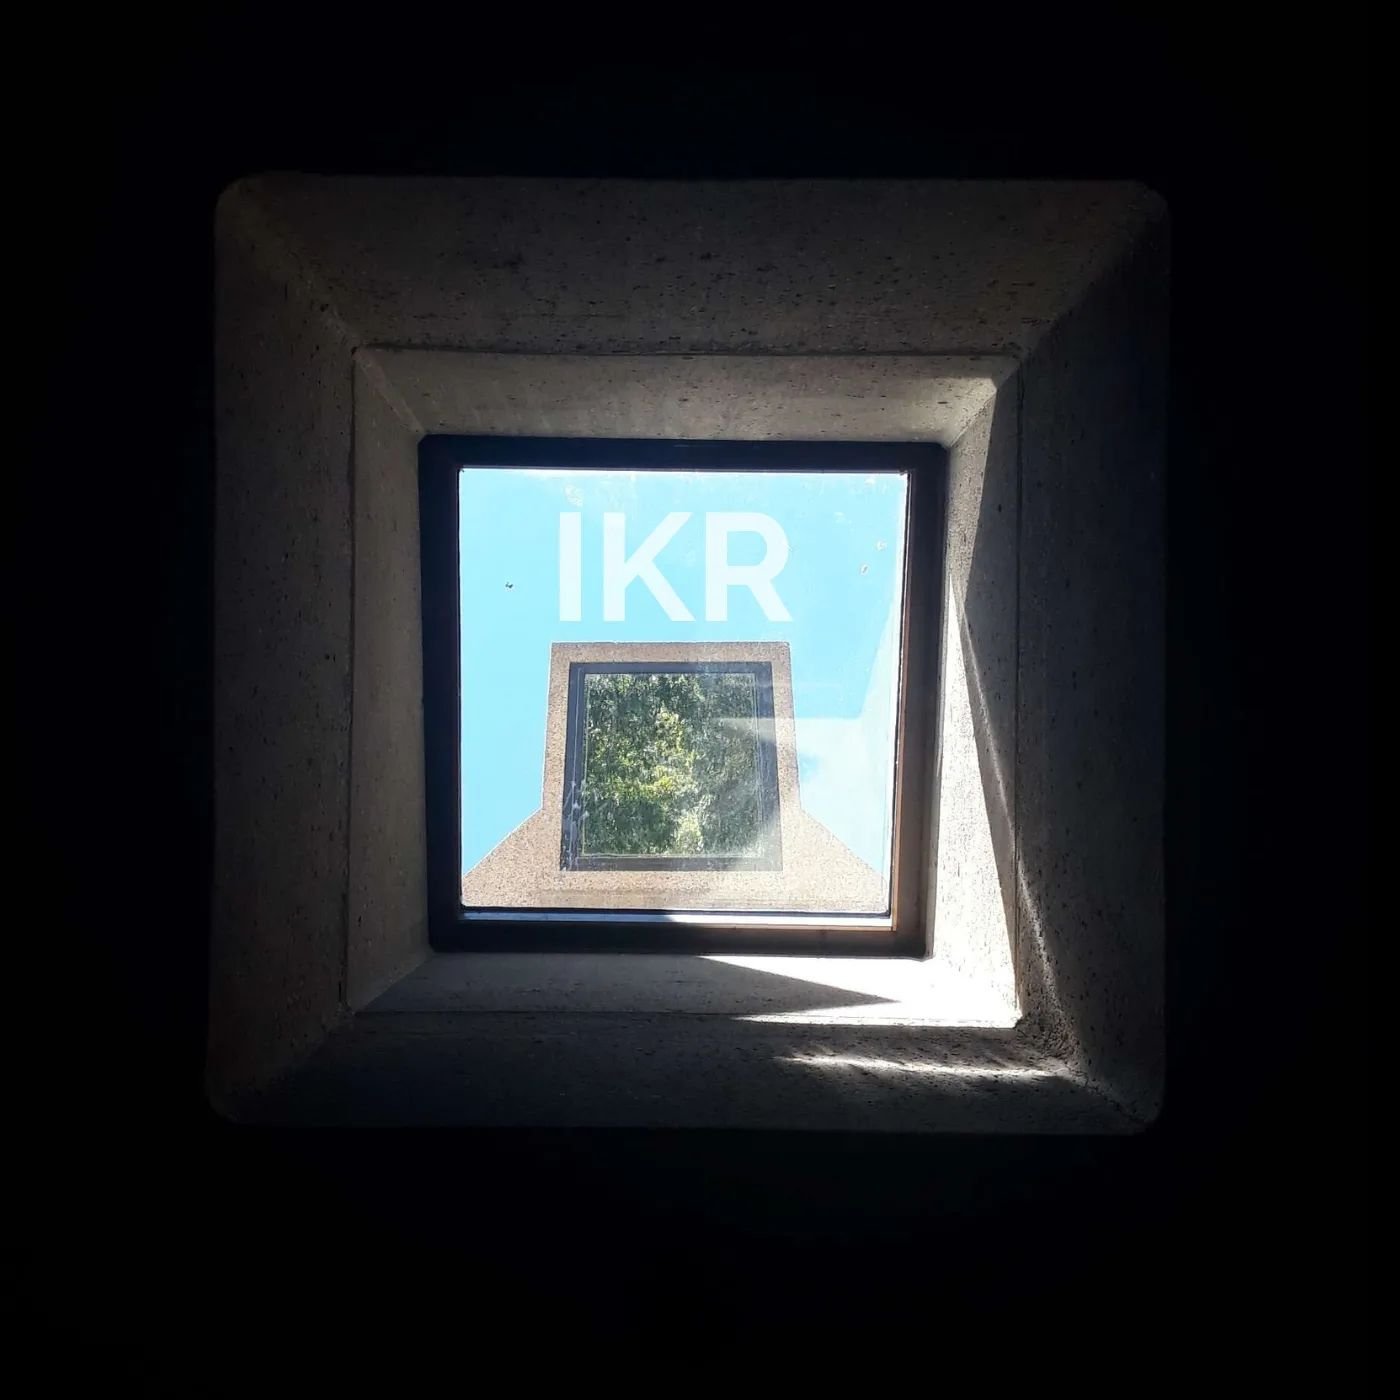 The sequel to my EP, #IRL is out and it's called #IKR 👀
Haha really loving these acronyms, check out the project to find out what they mean 🎧 Link in bio!

I'll also be playing the new songs live for the first time this Saturday at @commonwealthyyc